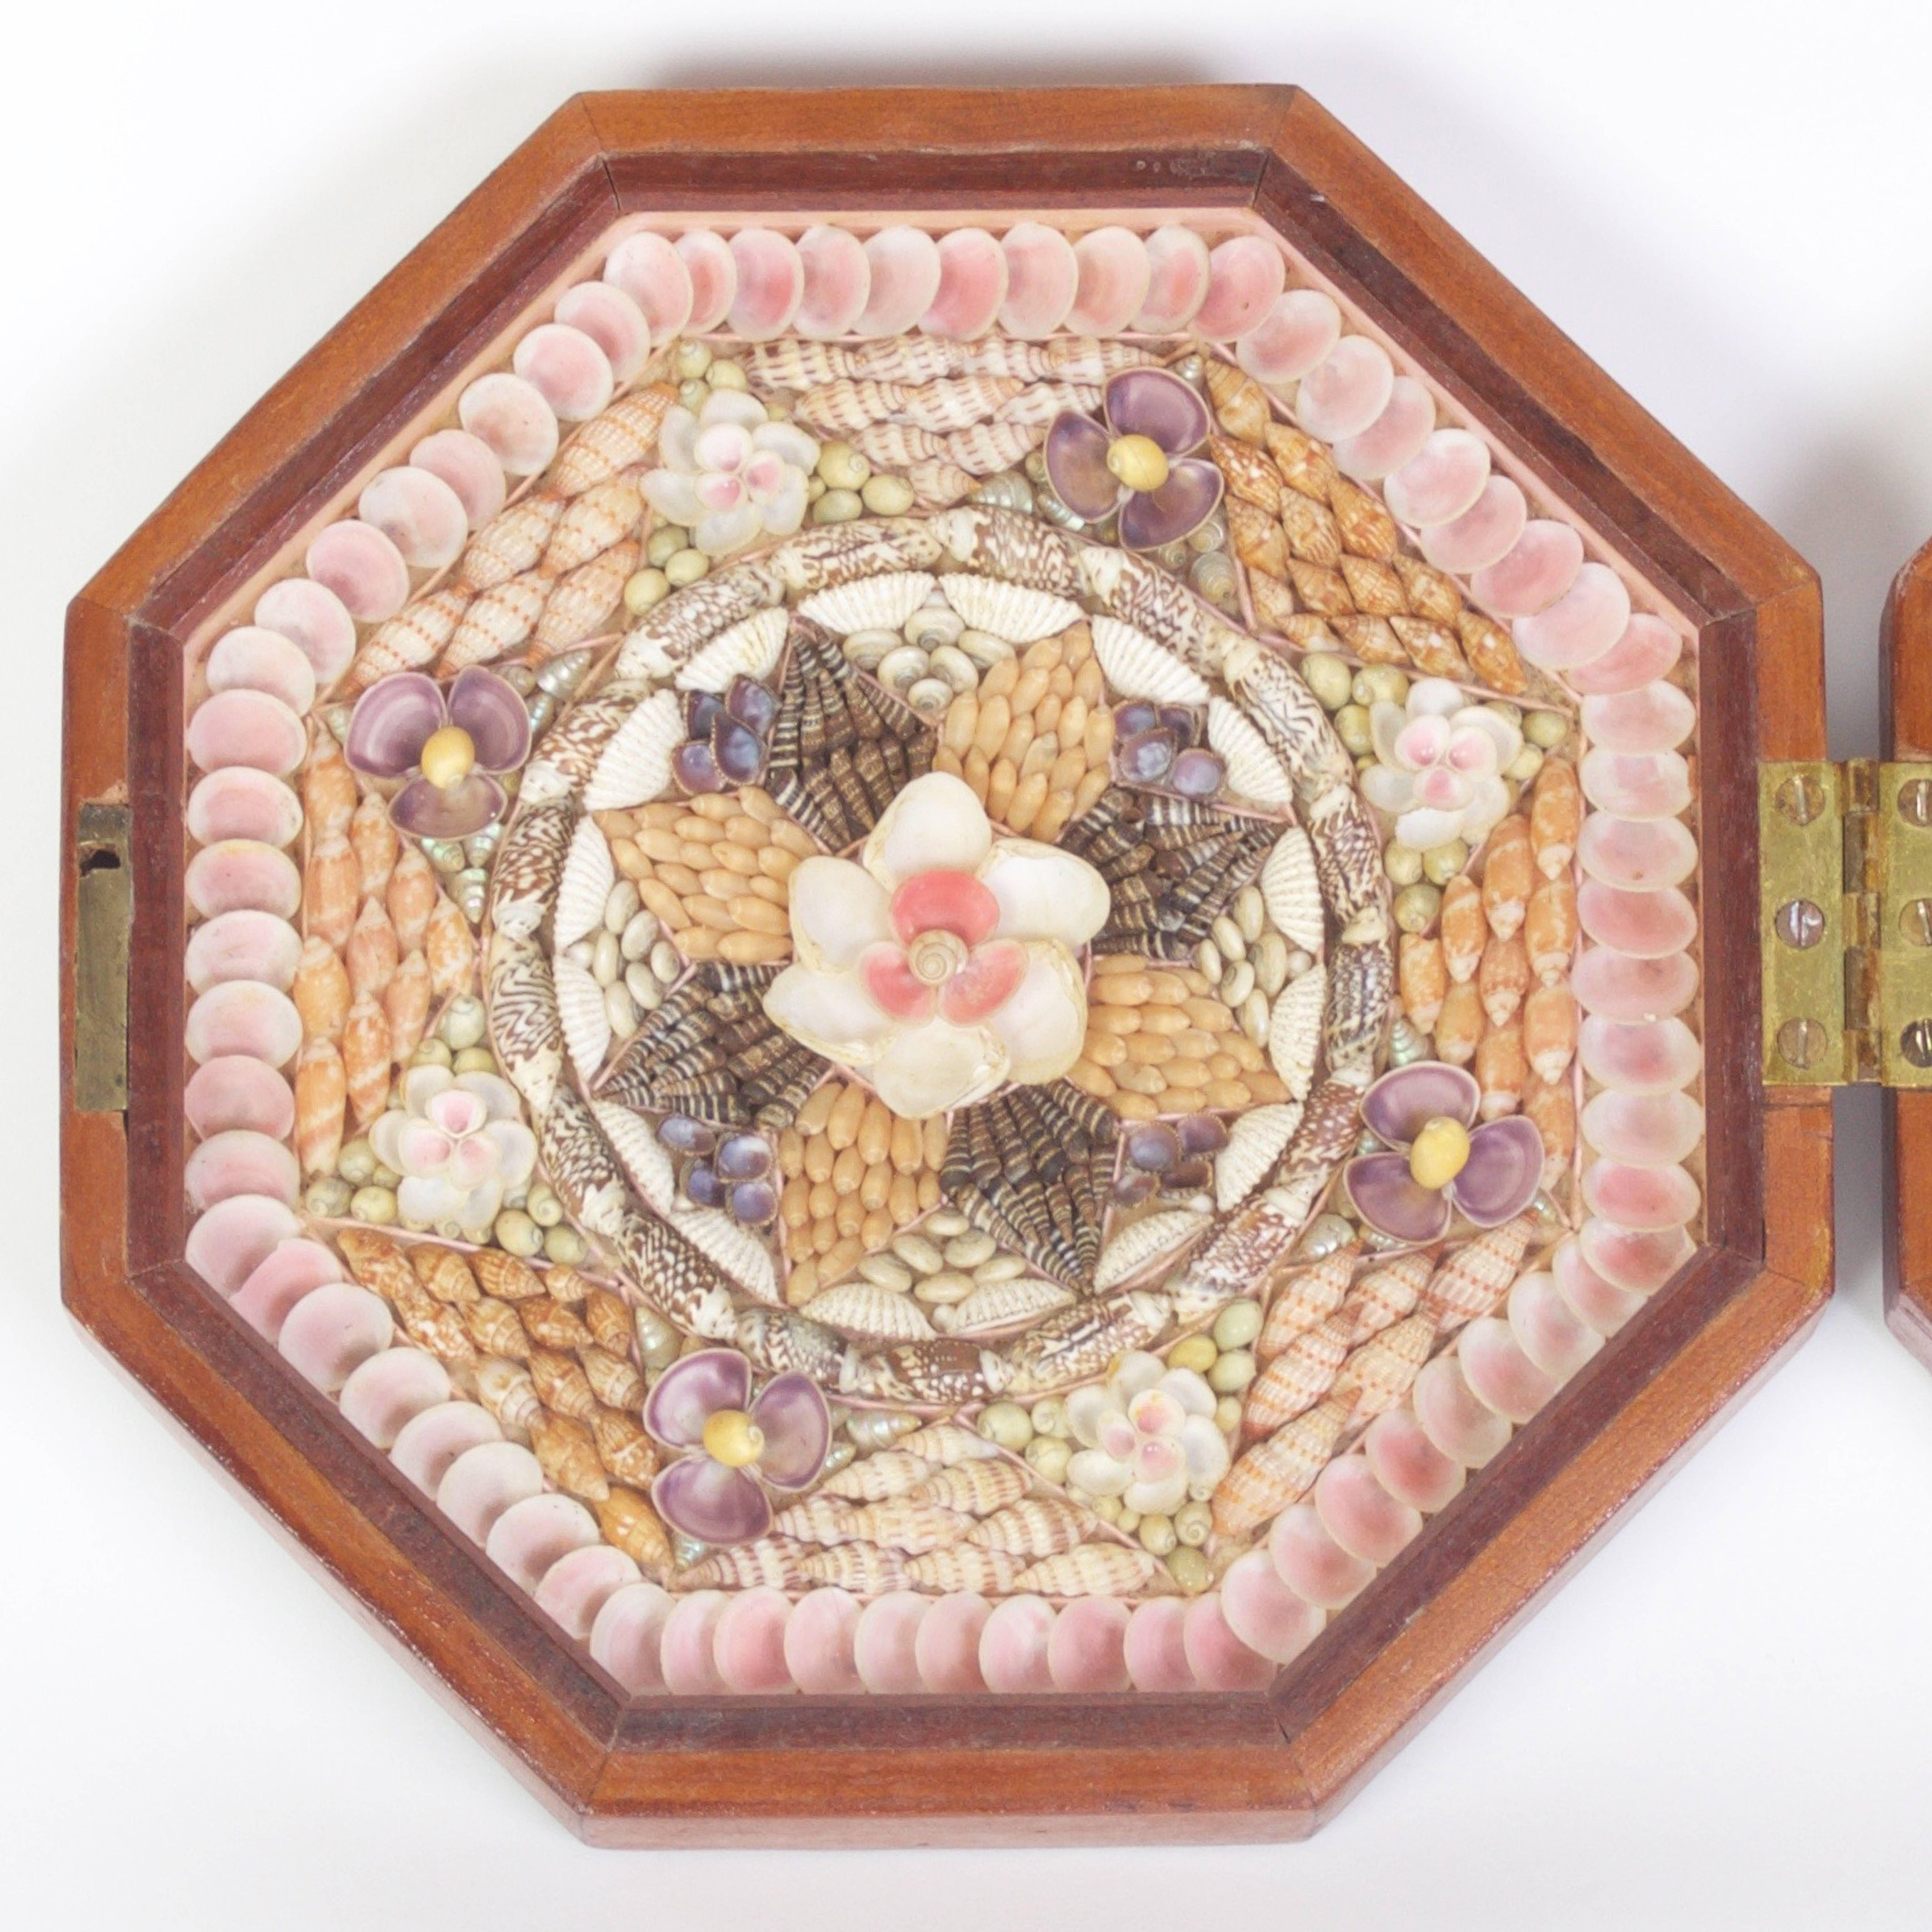 Romantic two-part sailor's valentine with one side a flower and one a heart, both surrounded by a colorful array of exotic sea shells arranged with love and care. Presented in an antique mahogany, octagonal box. Measures: H 3, W 9.25, D 9.25 when